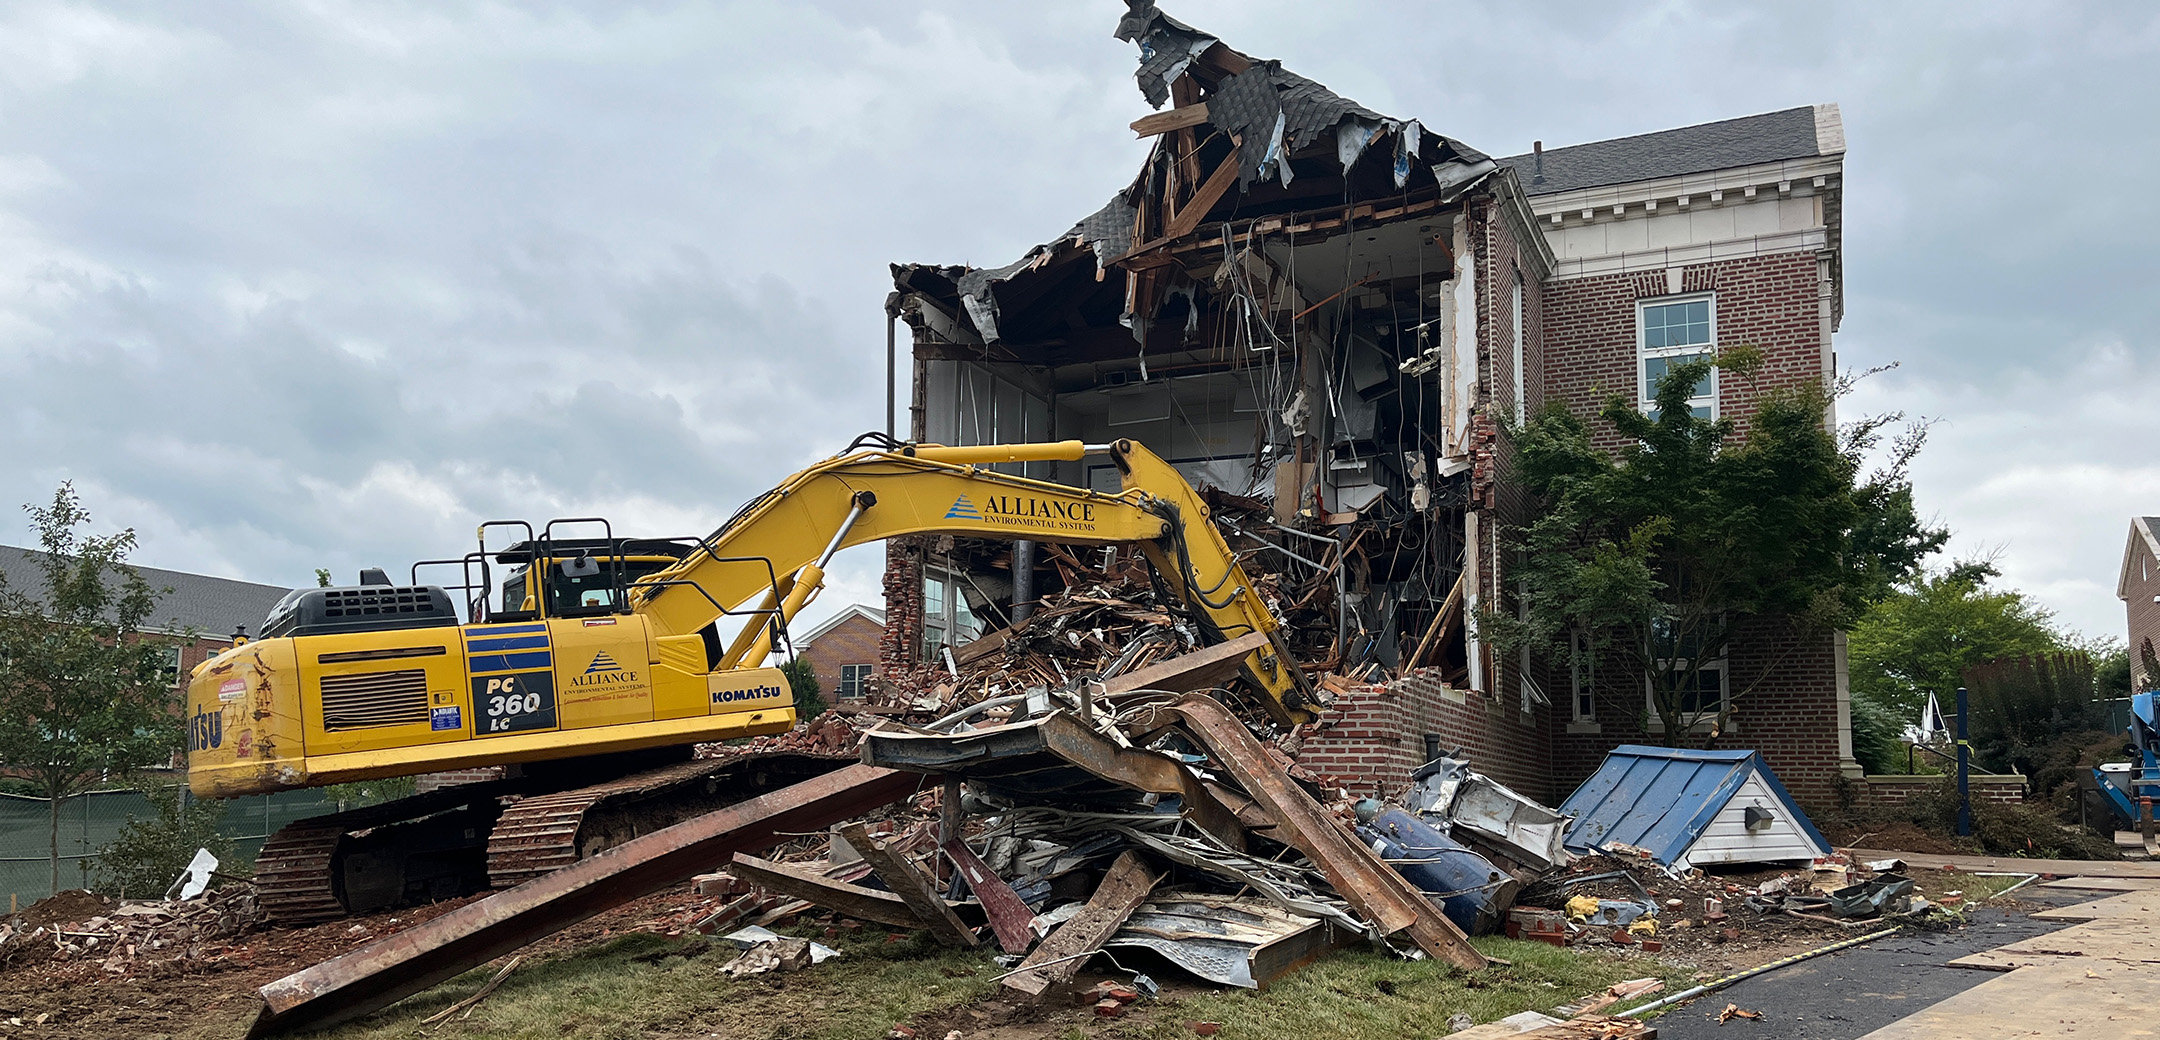 The Good Counsel Building on Malvern Preparatory's campus being being demolished with a yellow construction vehicle